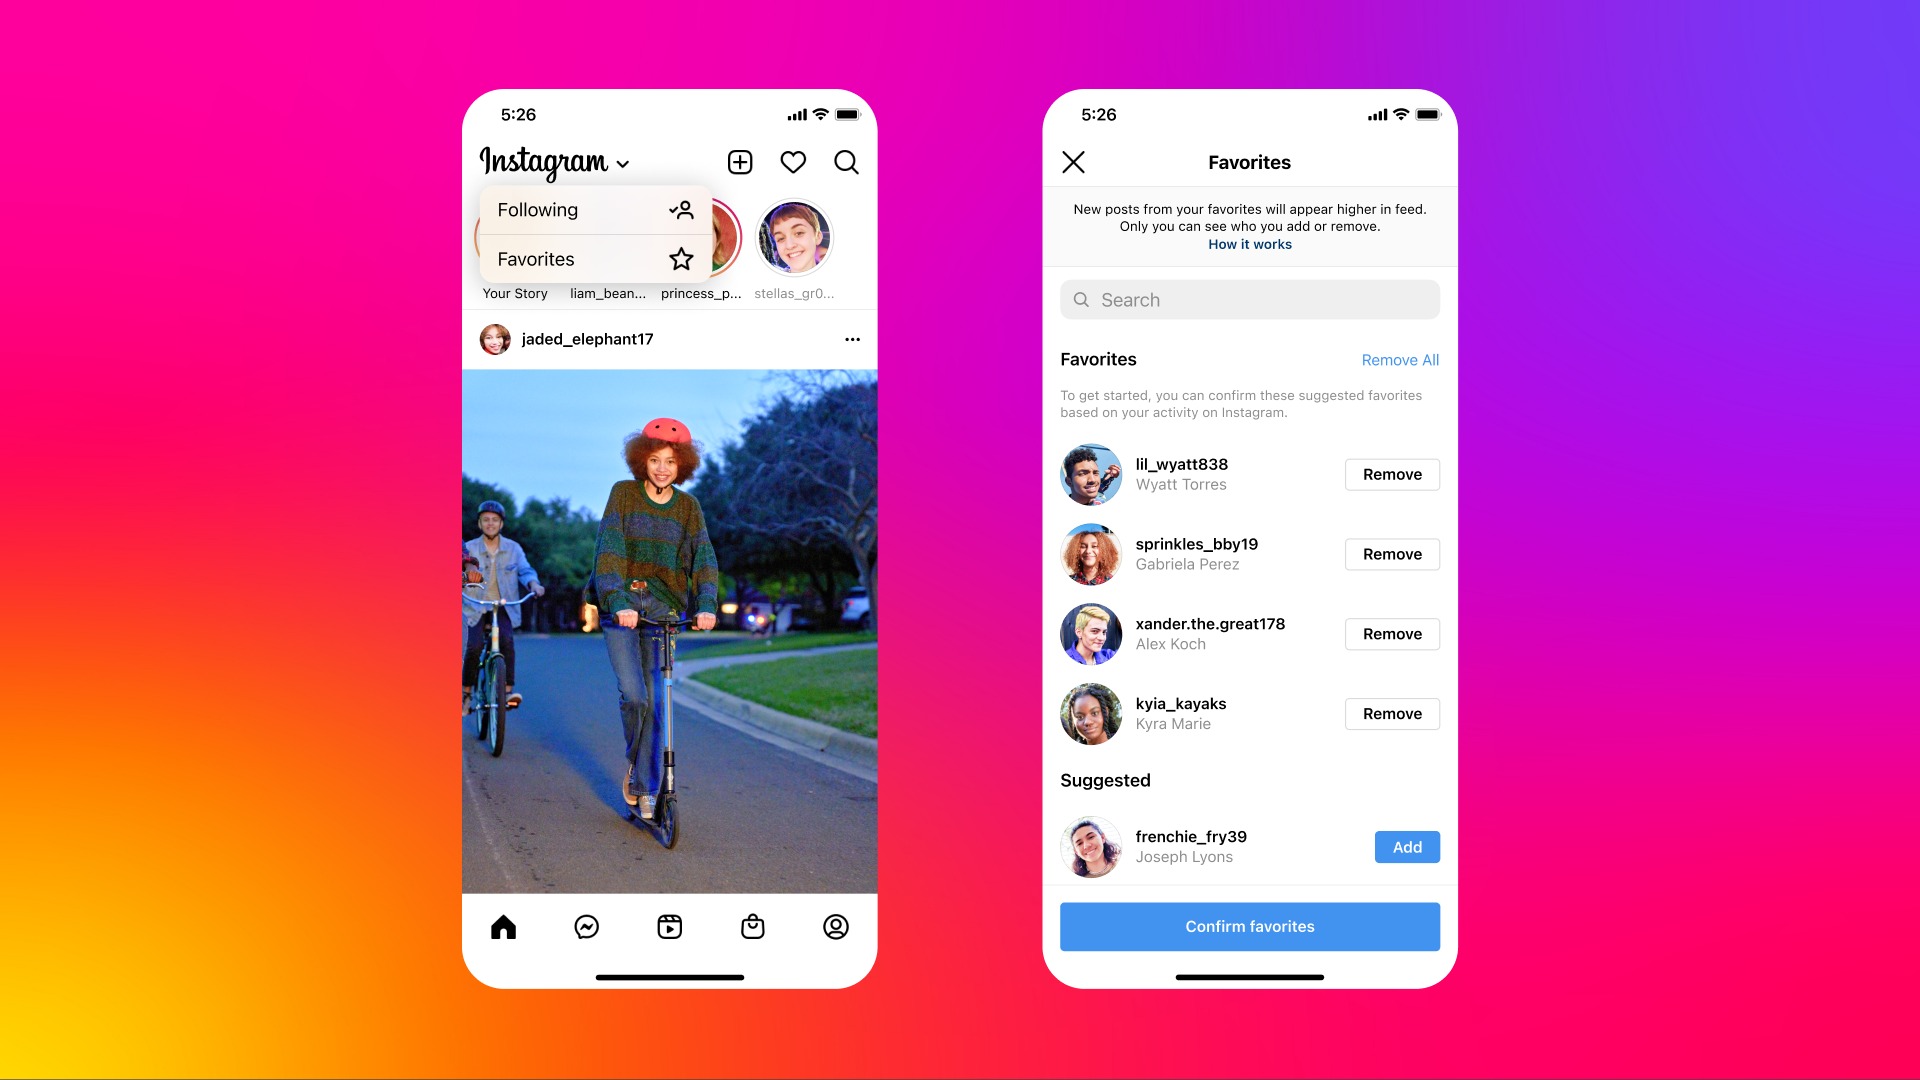 Instagram chronological feed is now available